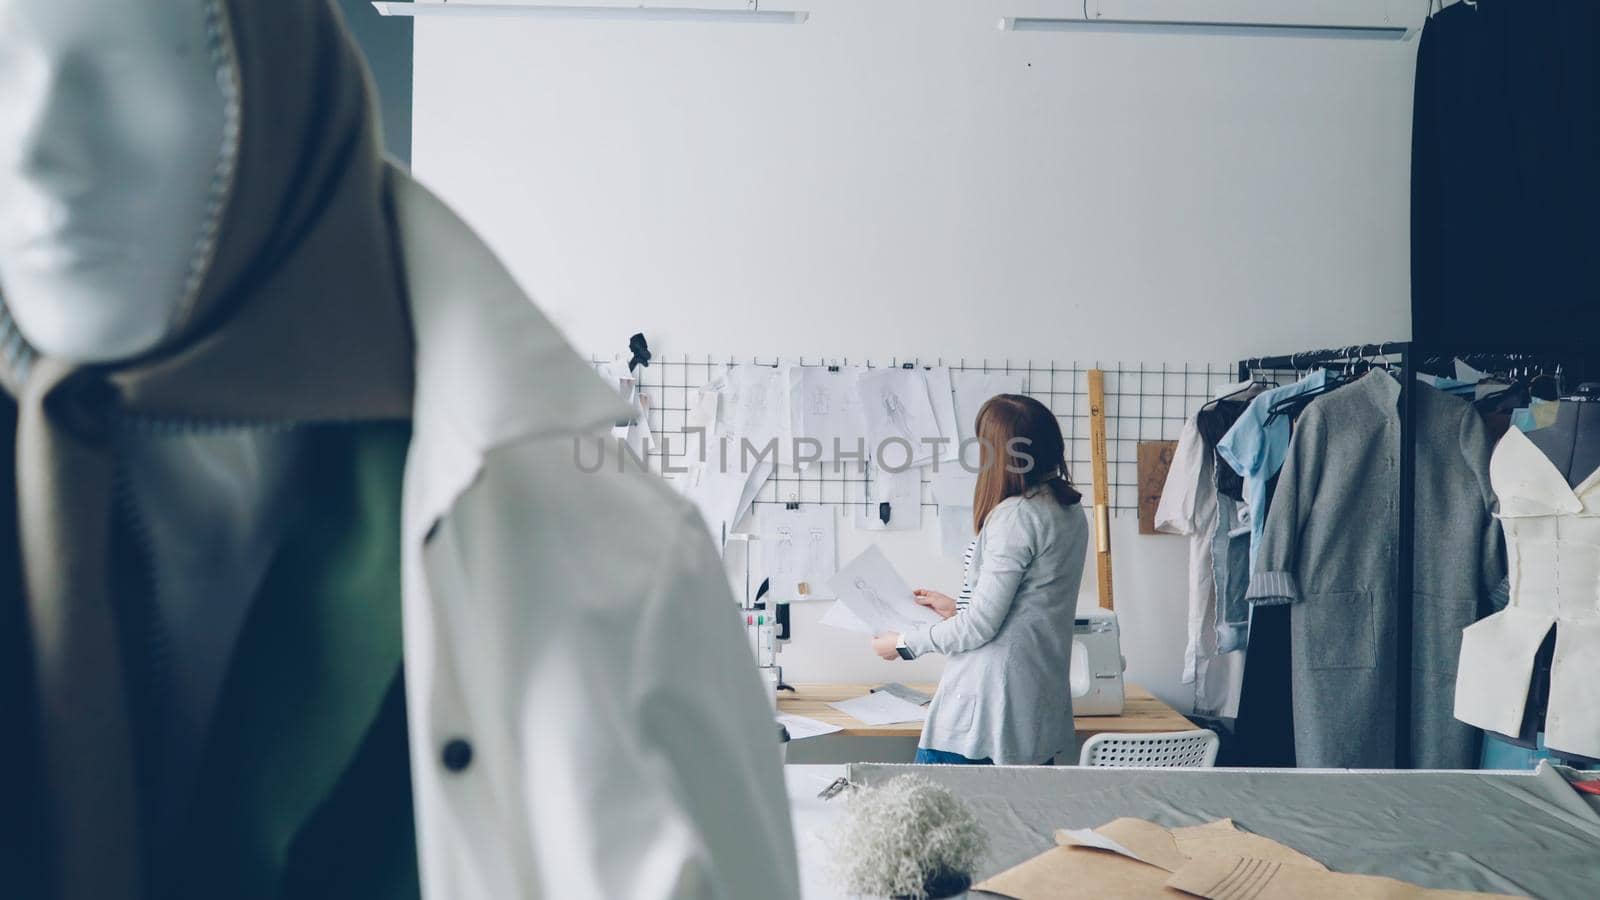 Attractive woman clothing designer is looking at garment sketches hanging on wall then choosing new drawings. Mannequin dresses in trendy clothes is in foreground. by silverkblack